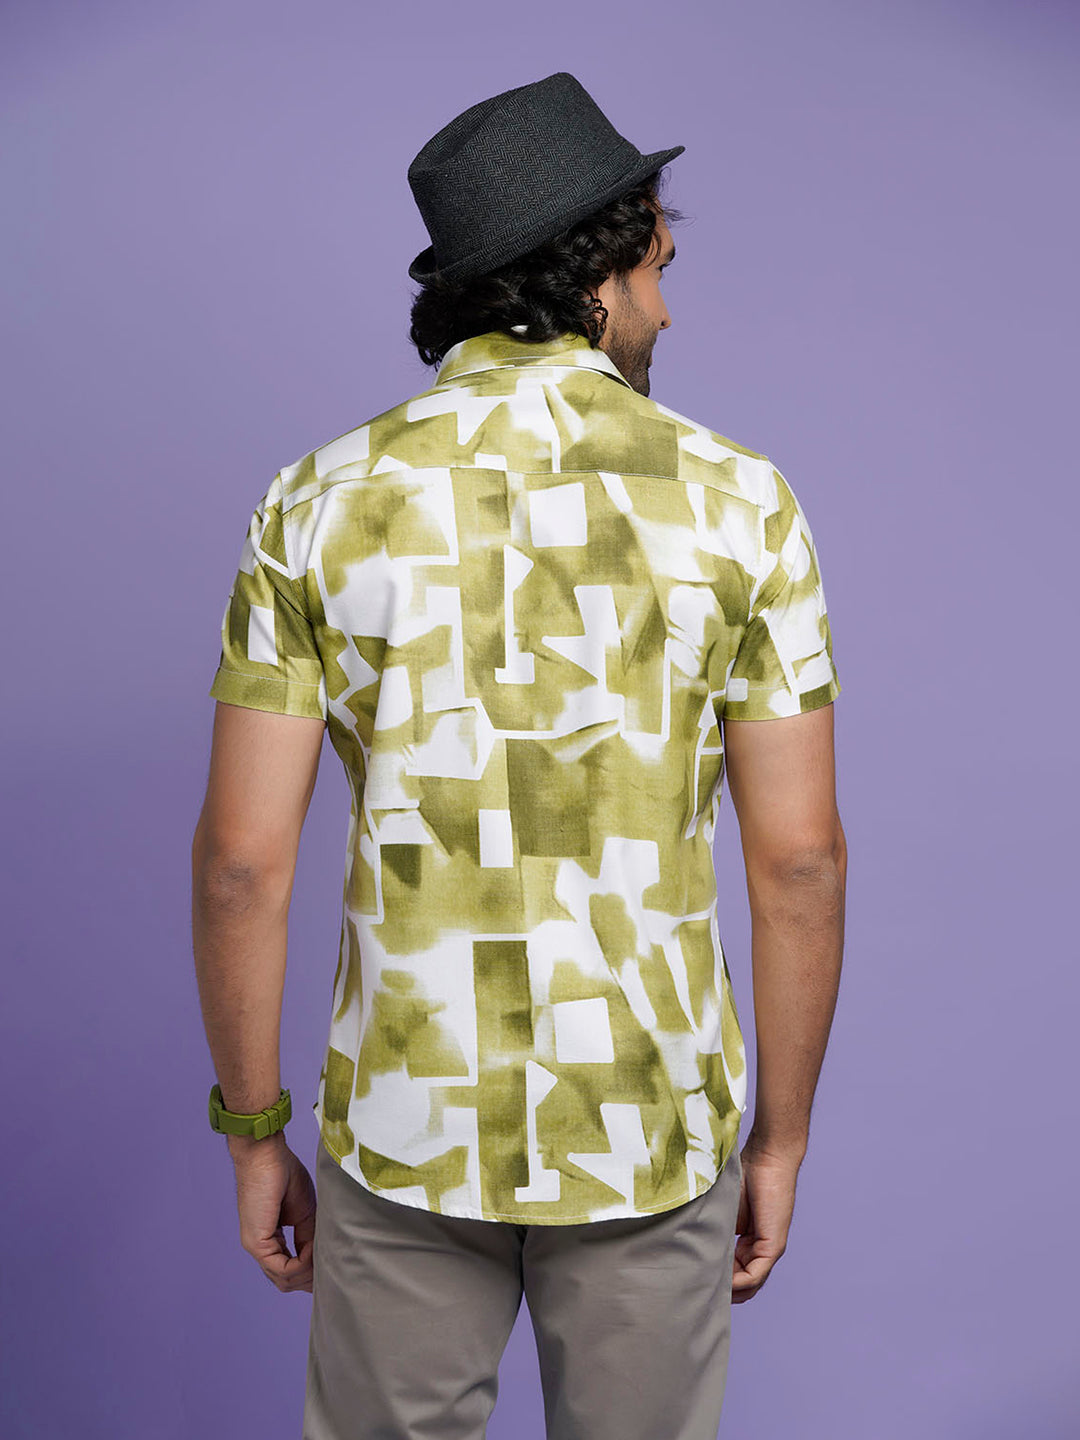 Absolute Modal Cotton Green Abstract Slim Fit Shirt